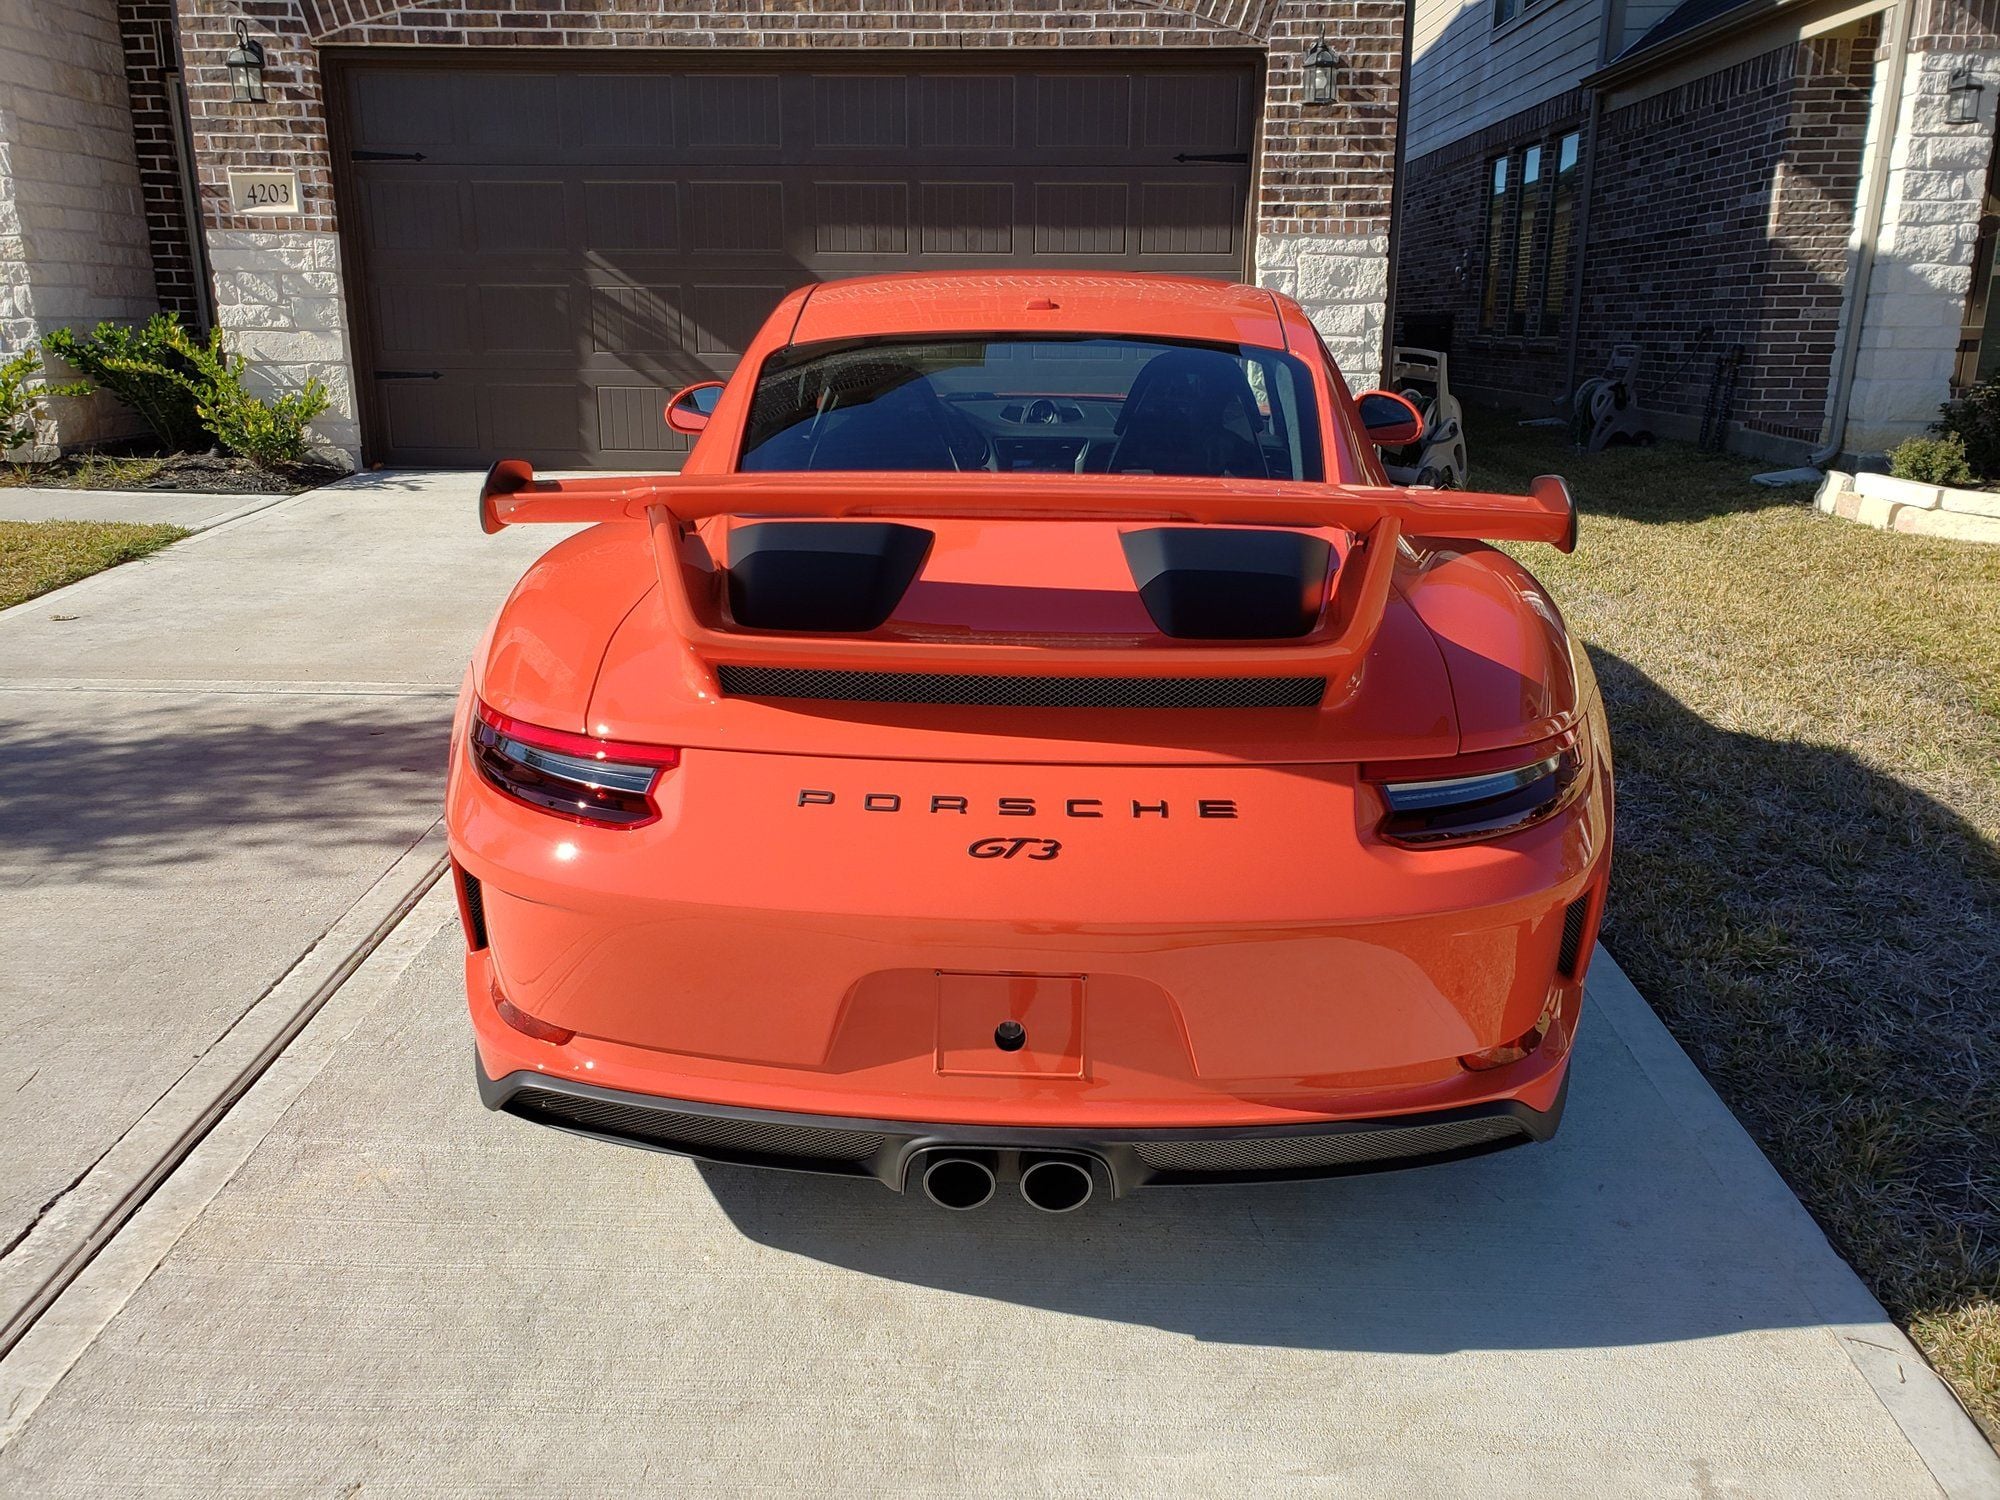 2018 Porsche 911 - F.S: 2018 Porsche 911 GT3 6MT Lava/Black w/only 680 Miles In Stunning Condition. - Used - VIN WP0AC2A9XJS176192 - 680 Miles - 6 cyl - 4WD - Automatic - Coupe - Orange - Scottsdale, AZ 85250, United States